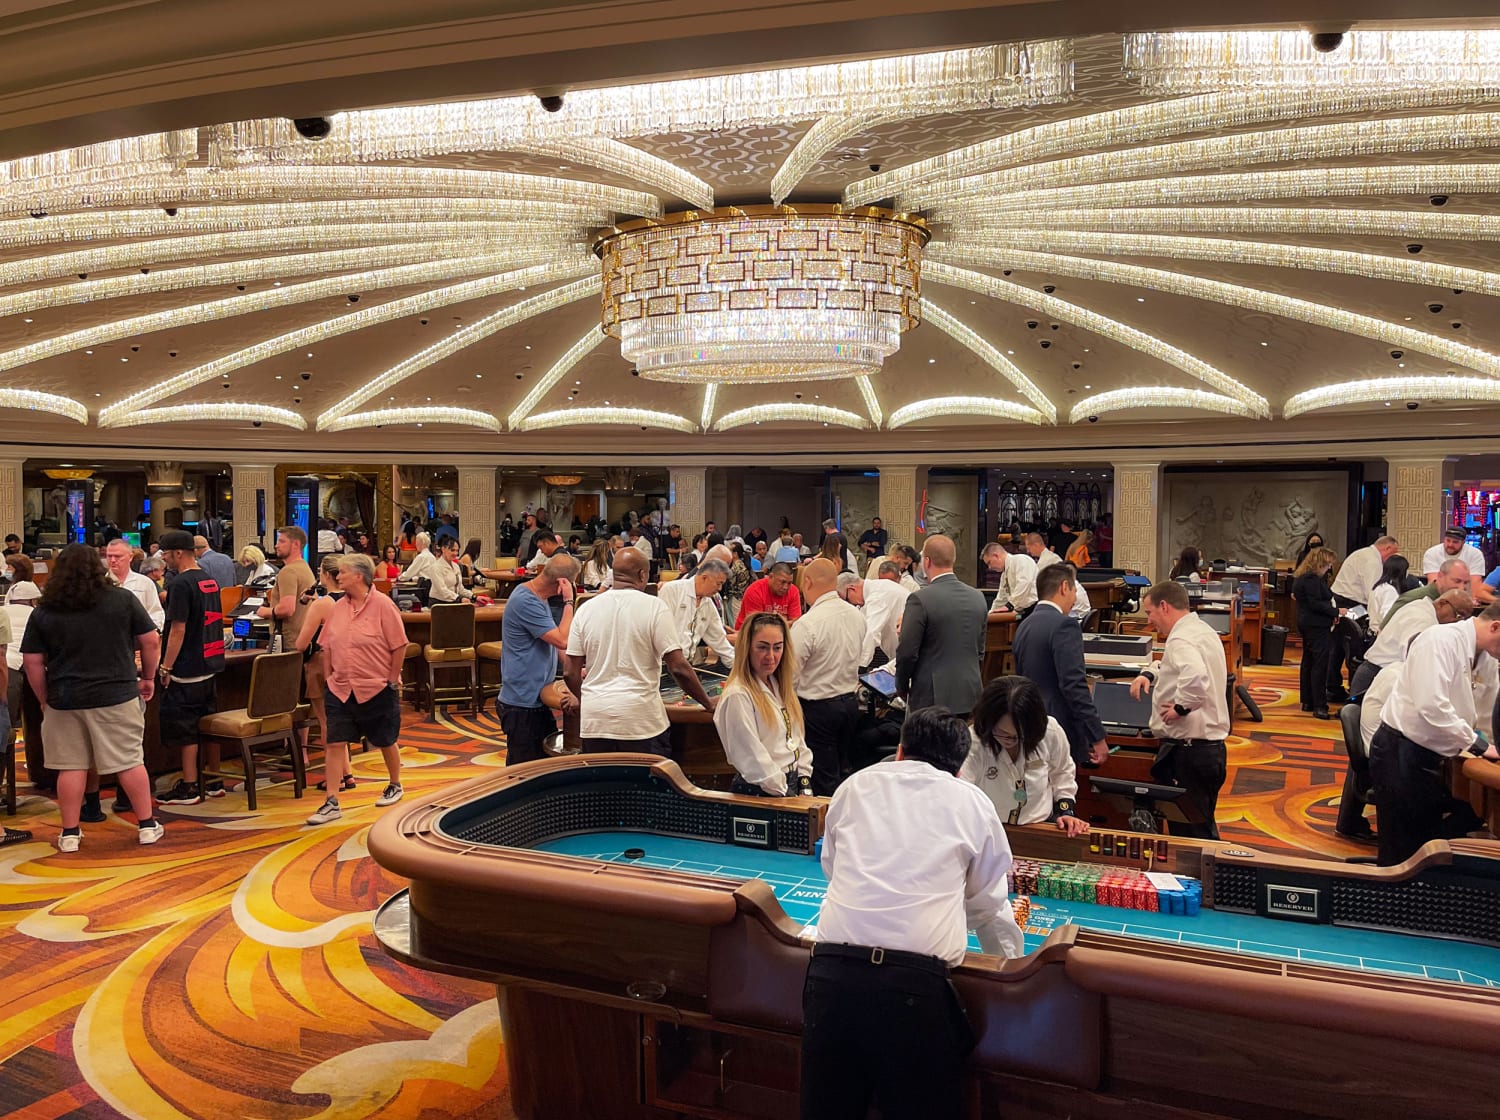 Caesars Palace Hotel & Casino - What To Know BEFORE You Go